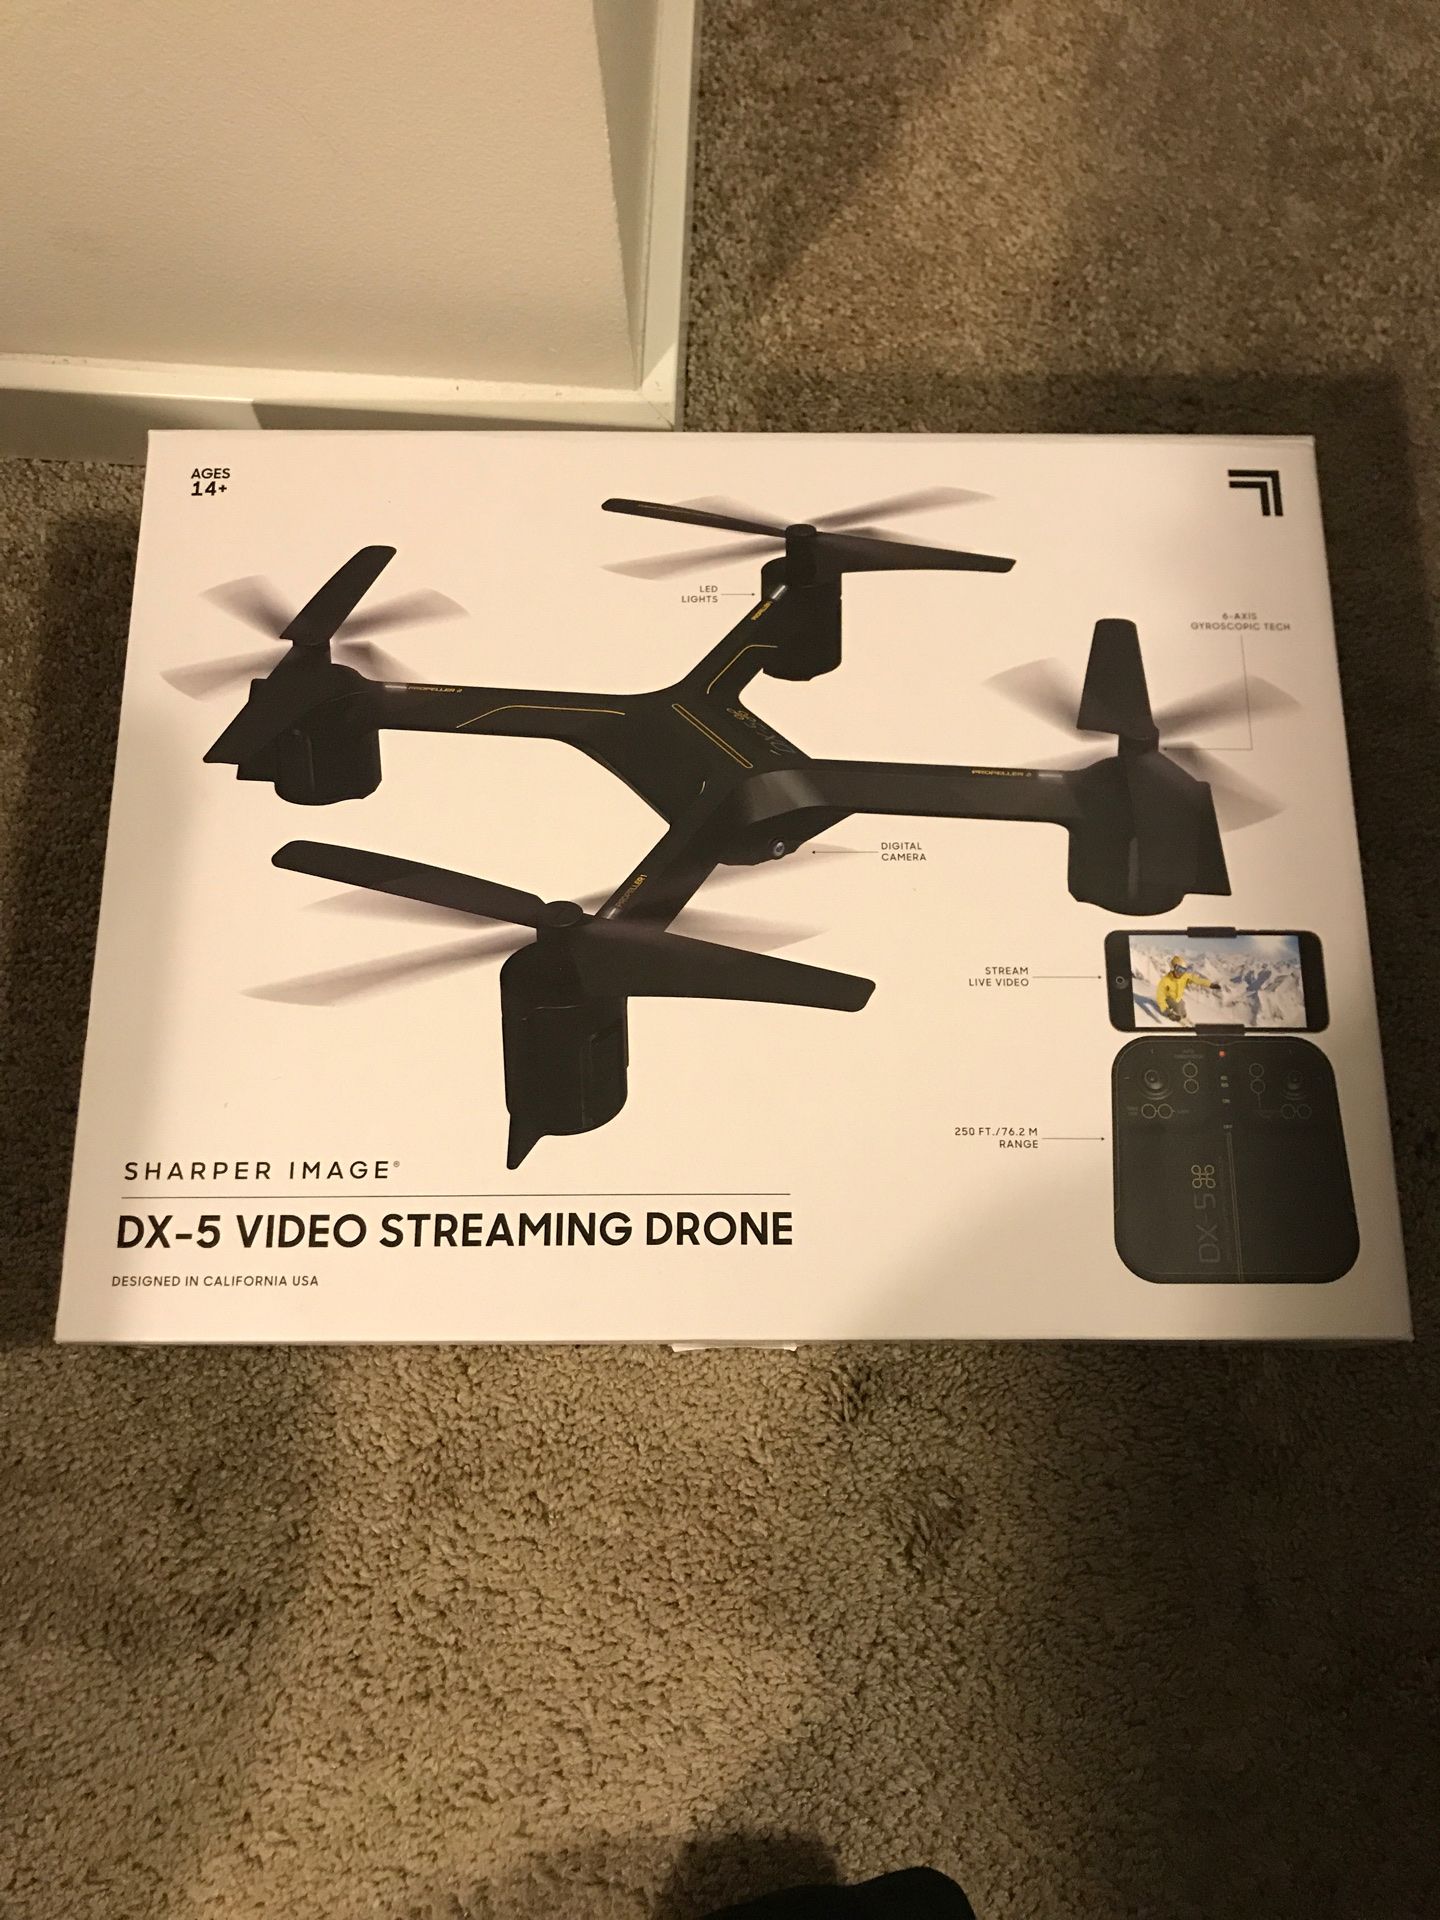 DX-5 Video Streaming Drone